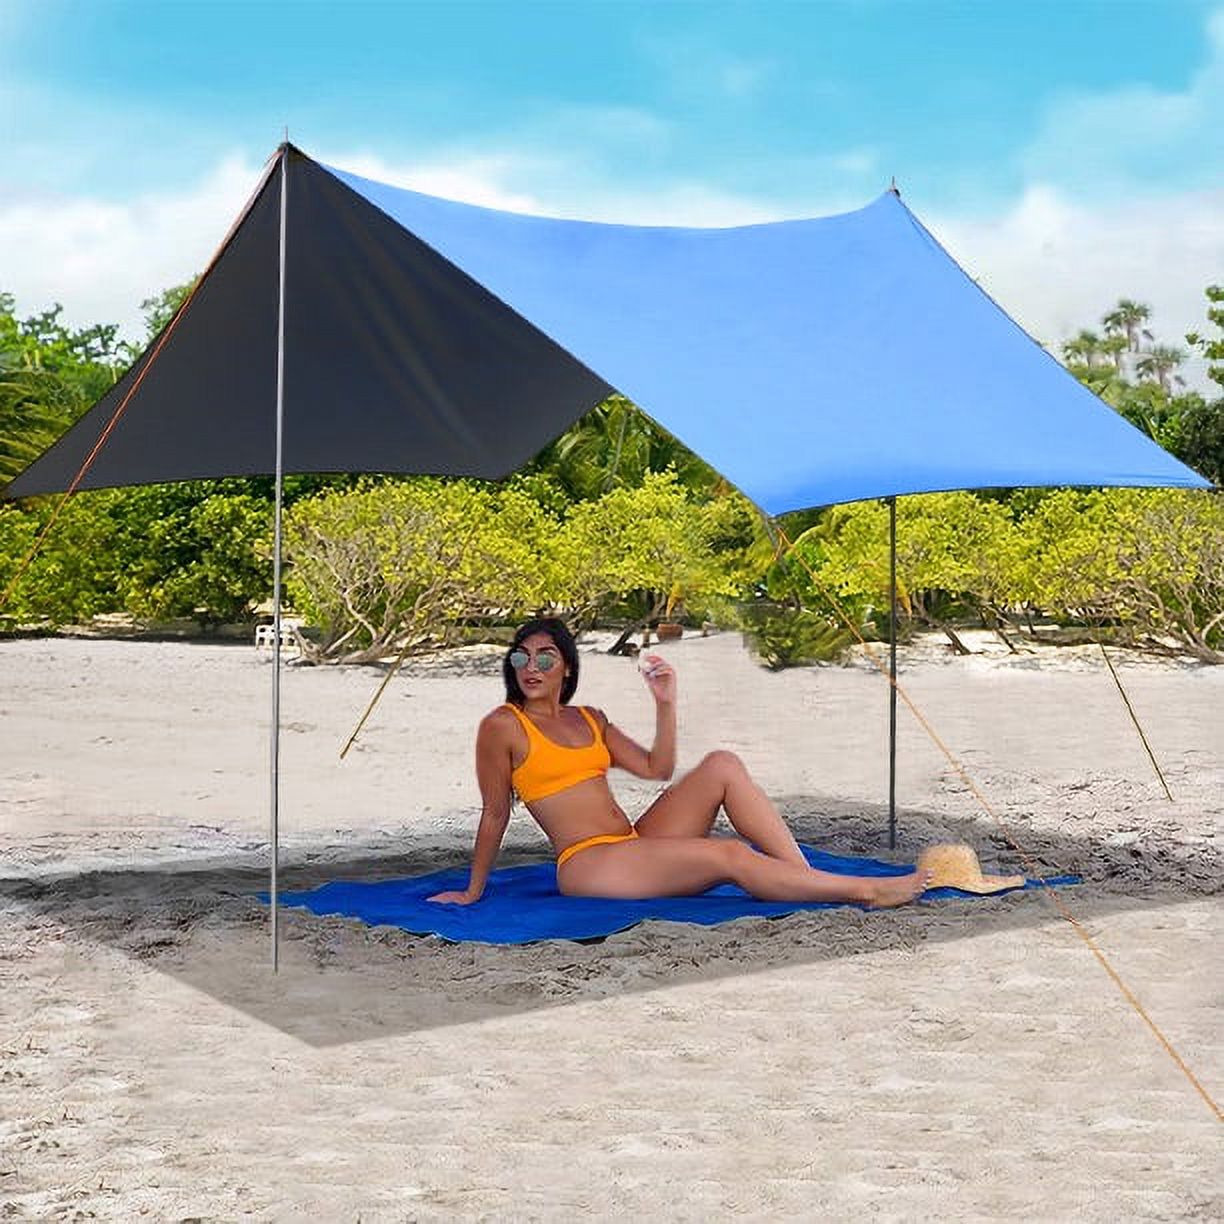 SUGIFT Family Portable Sun Shelter Beach Tent Canopy 10' x 10' UPF50+ Blue - image 1 of 8